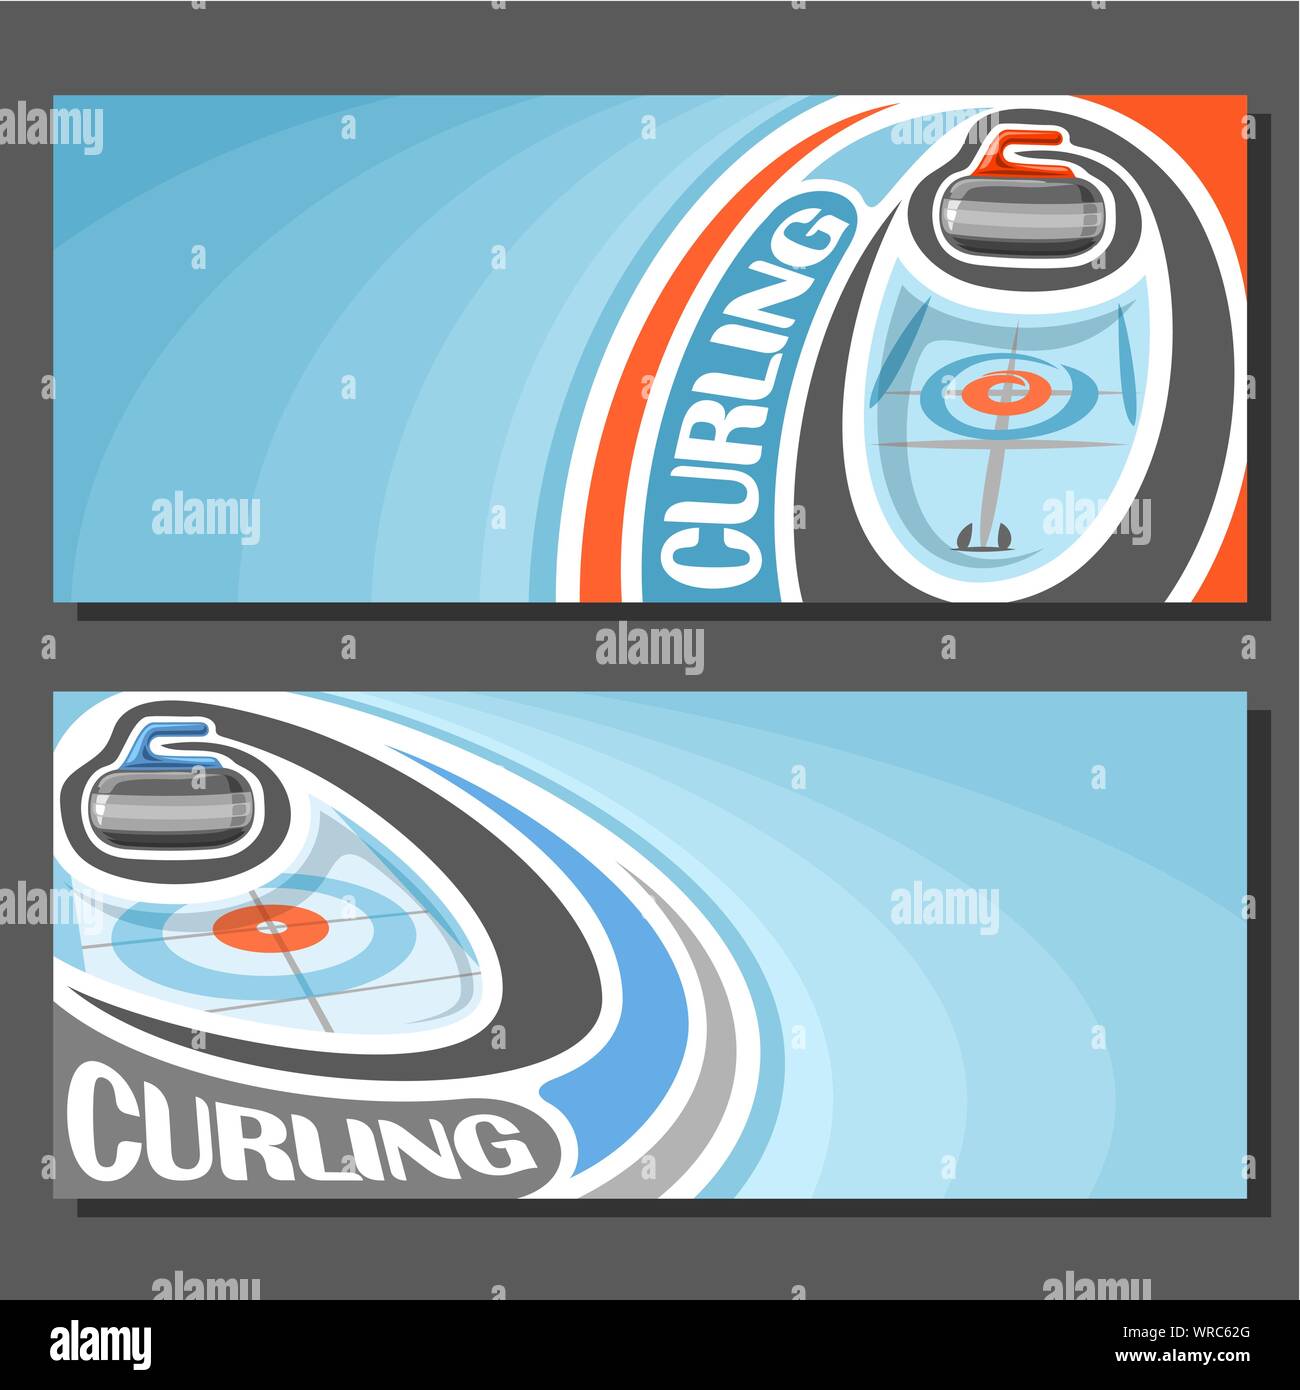 Vector banners for Curling game: granite stone sliding on curve trajectory on ice rink in circle target on blue abstract background. Stock Vector